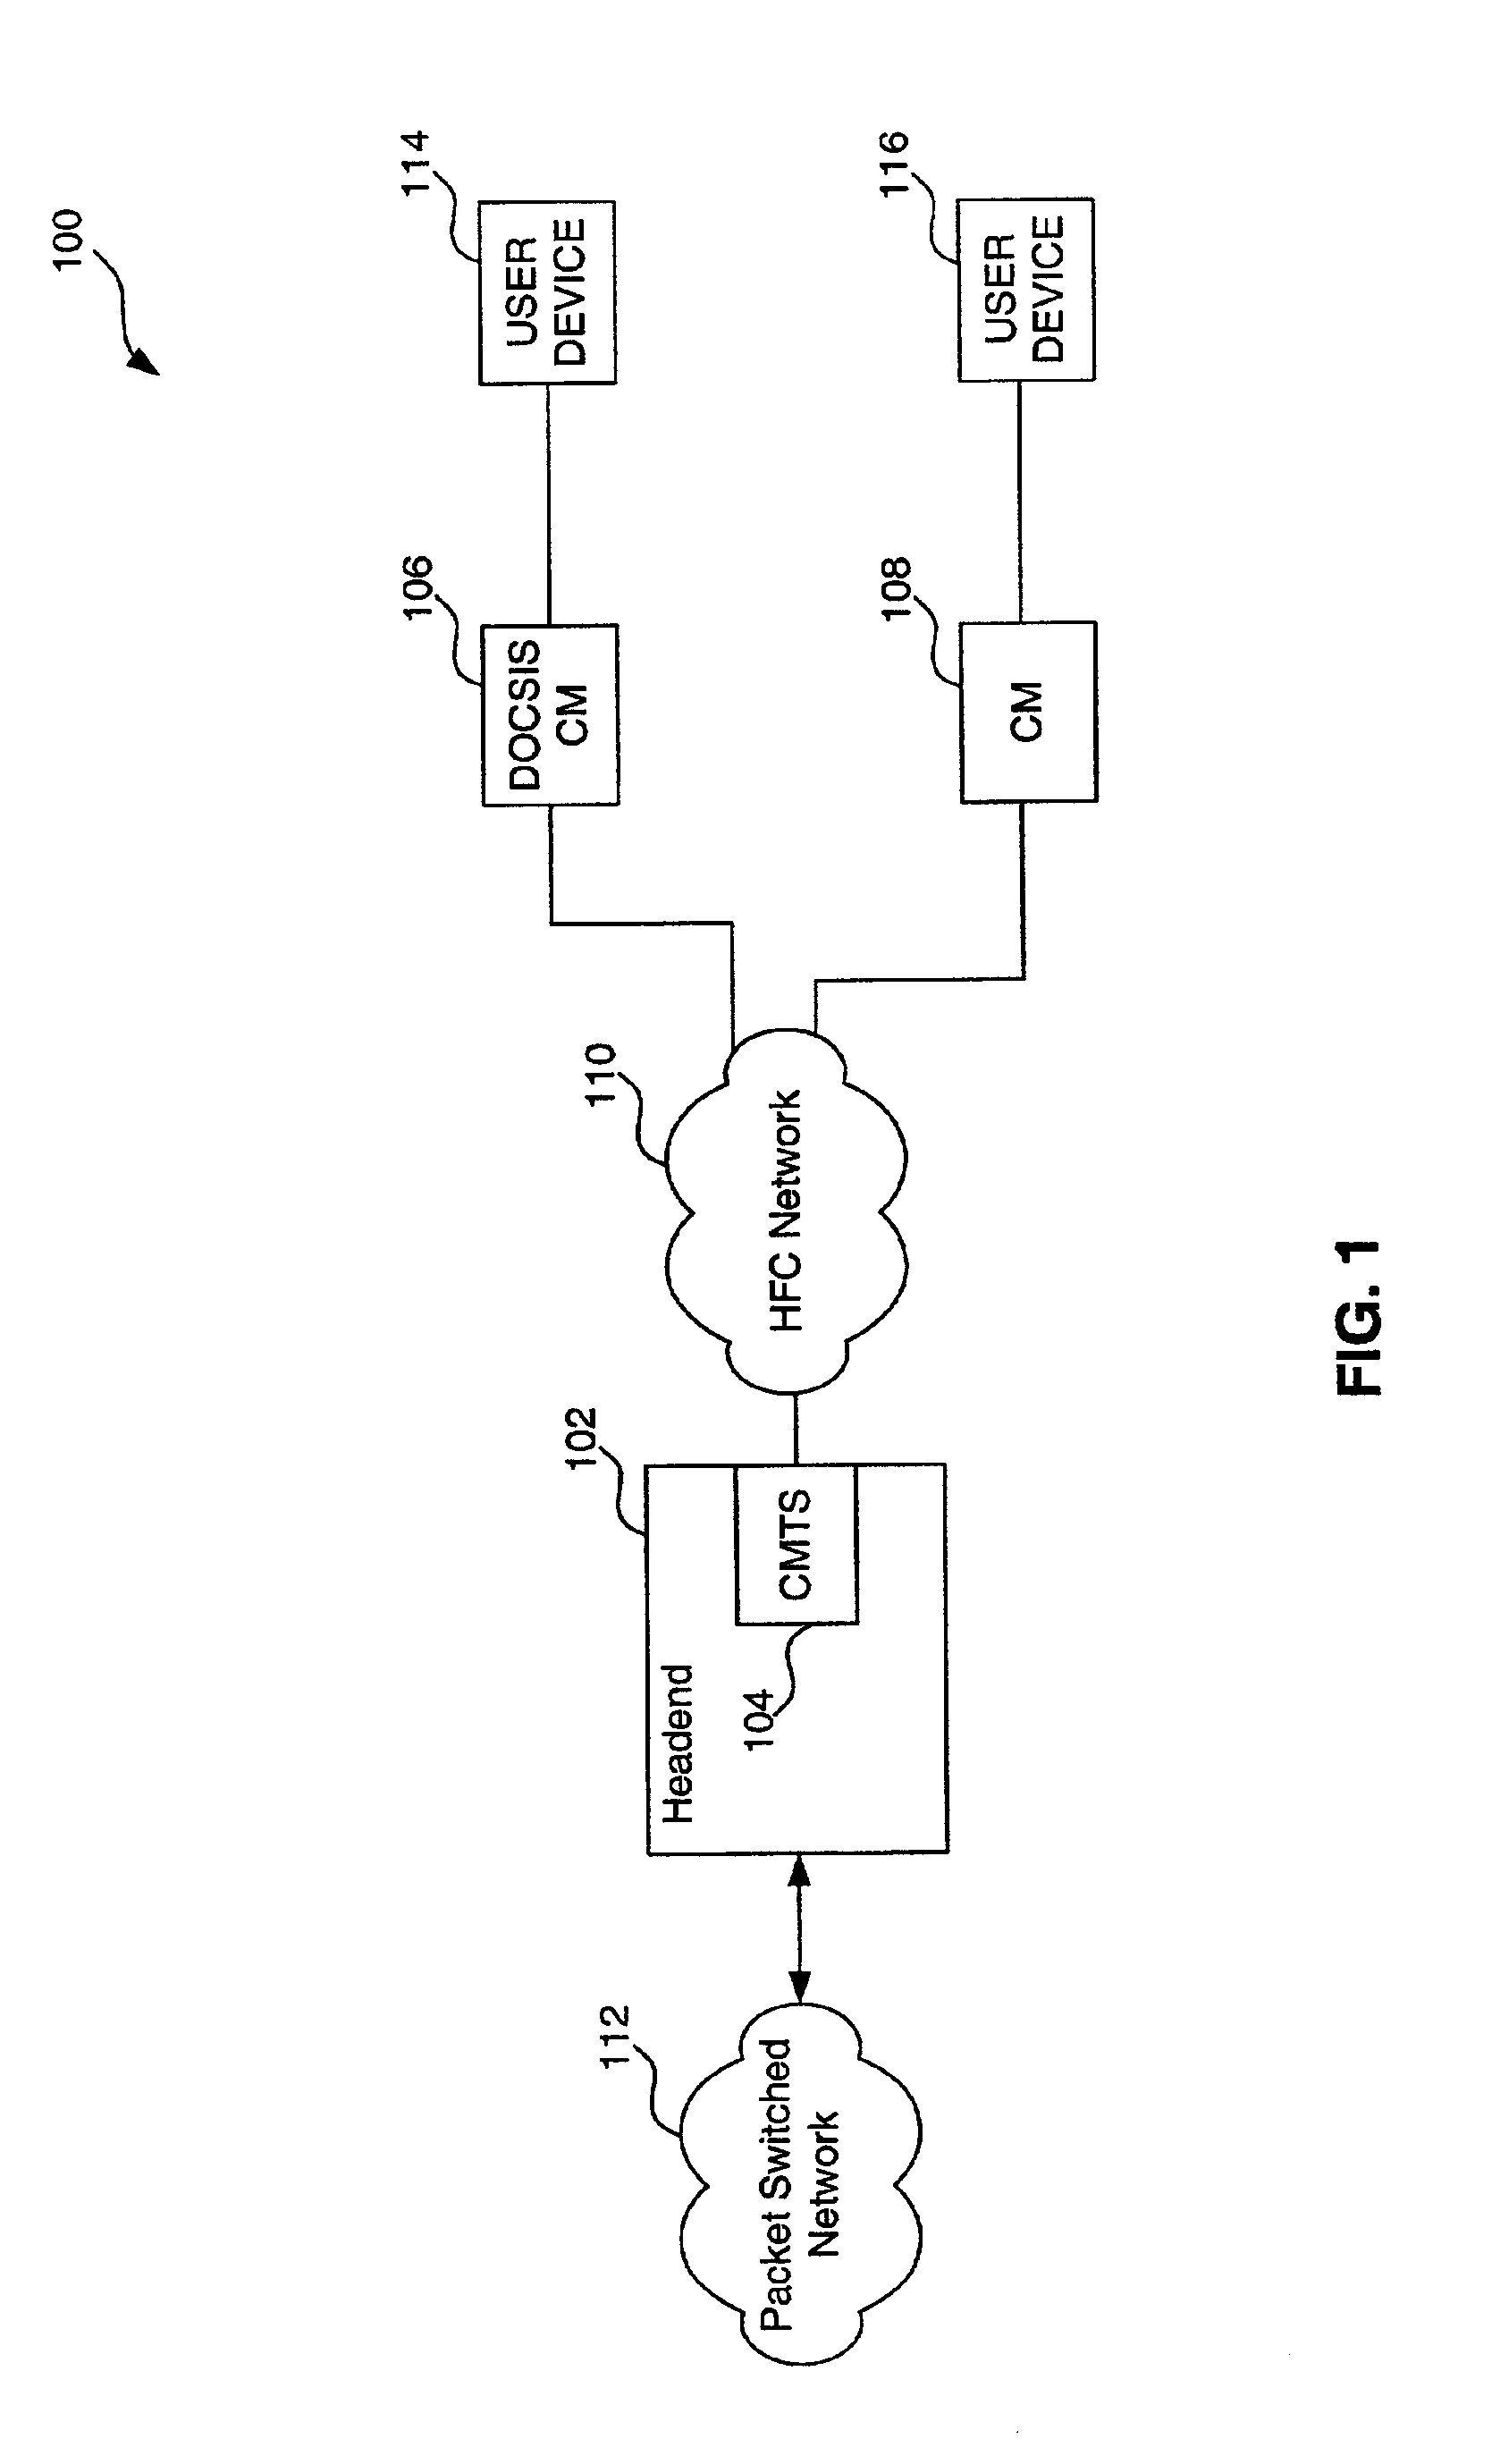 Cable modem system and method for dynamically mixing protocol specific header suppression techniques